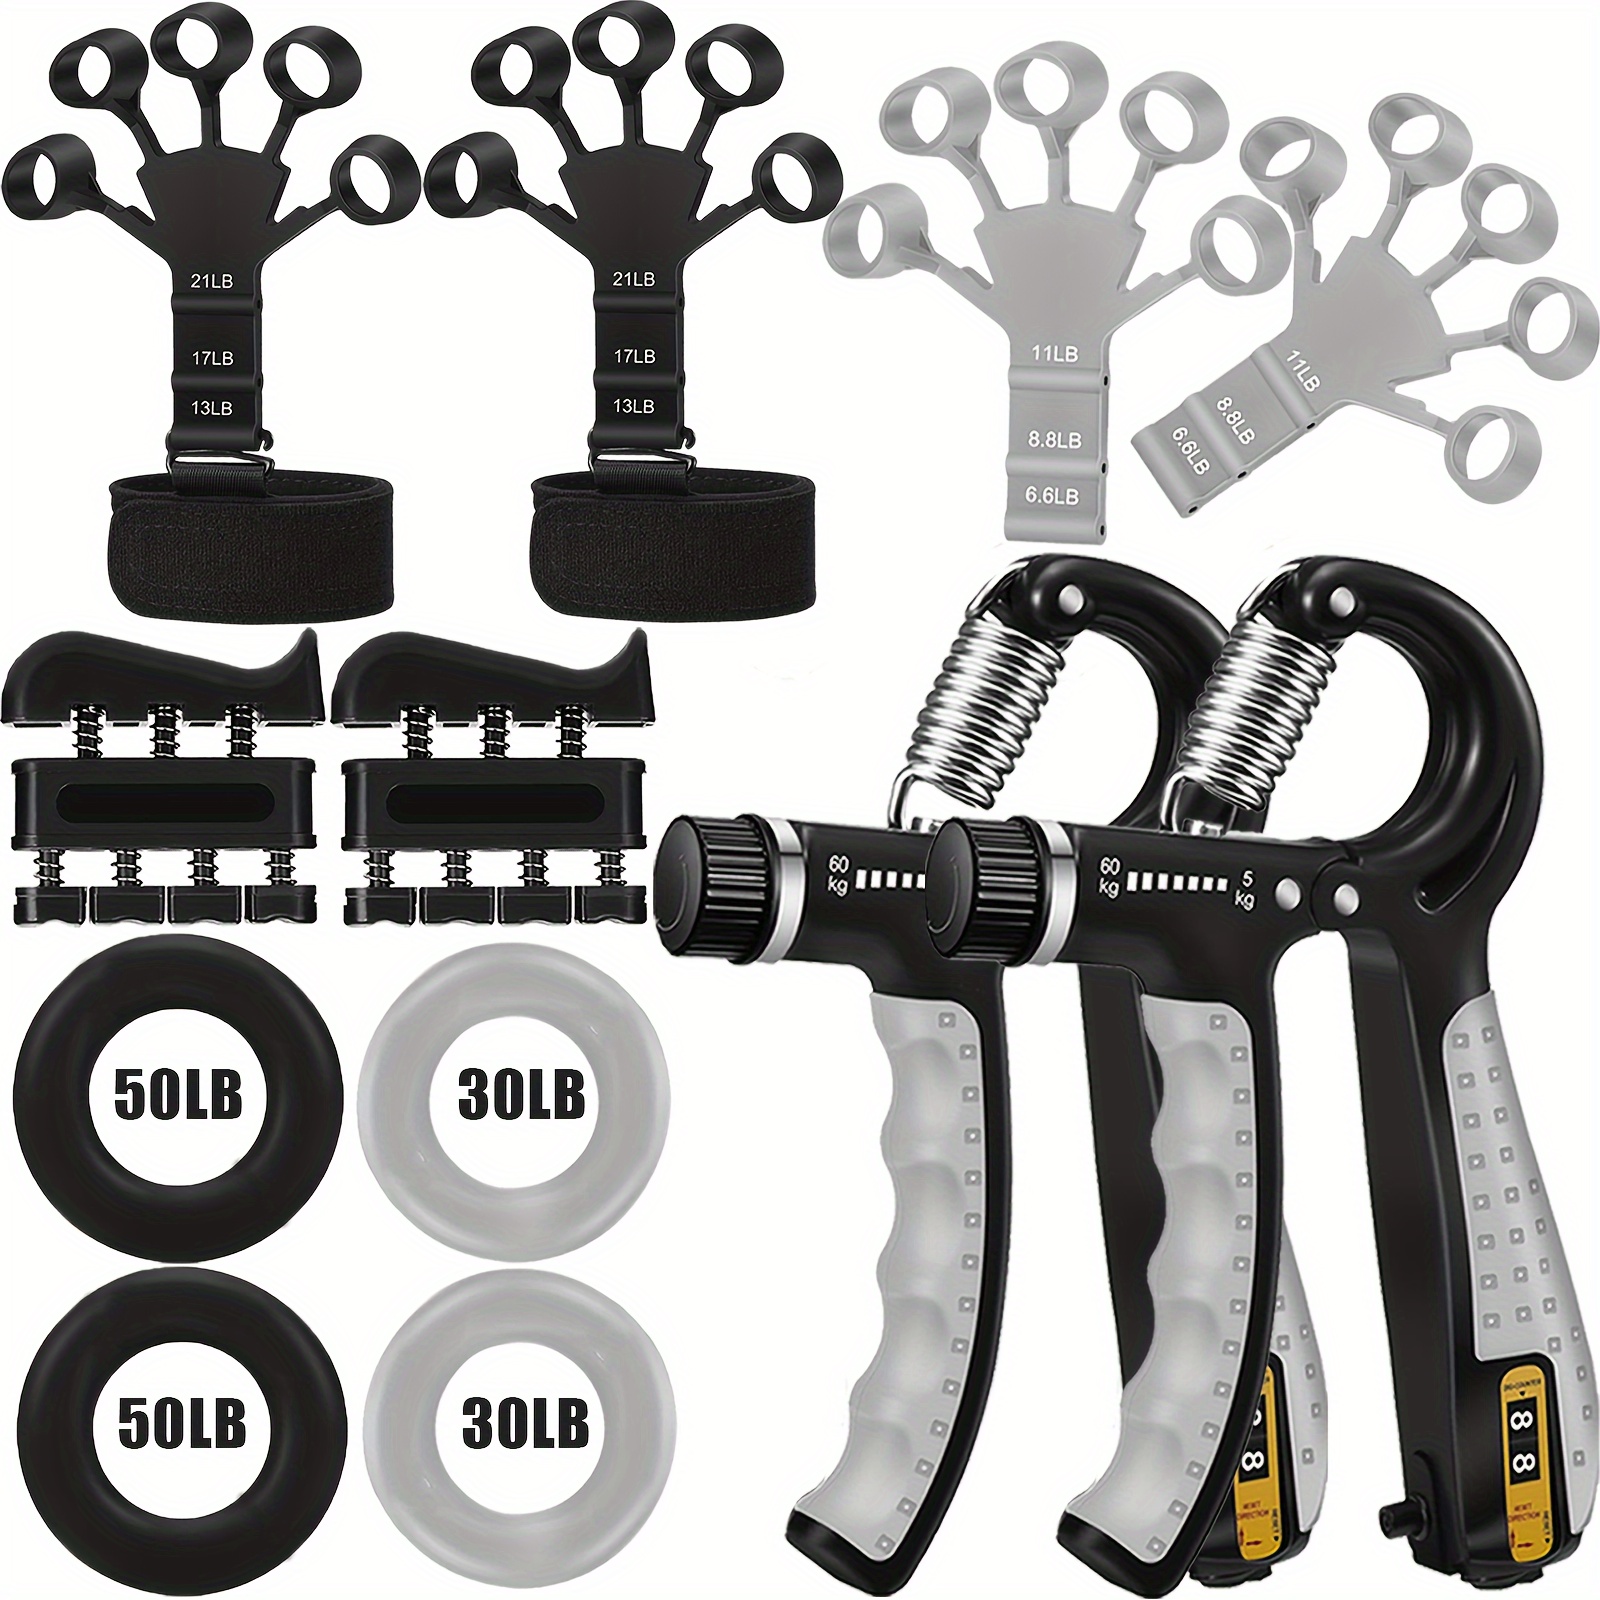 

12 Piece Grip Strength Trainer With Finger Exerciser, Hand Grip Strengthener, Hand Extension Exerciser And Large Forearm Workout Ring For Muscle Building And Injury Recover